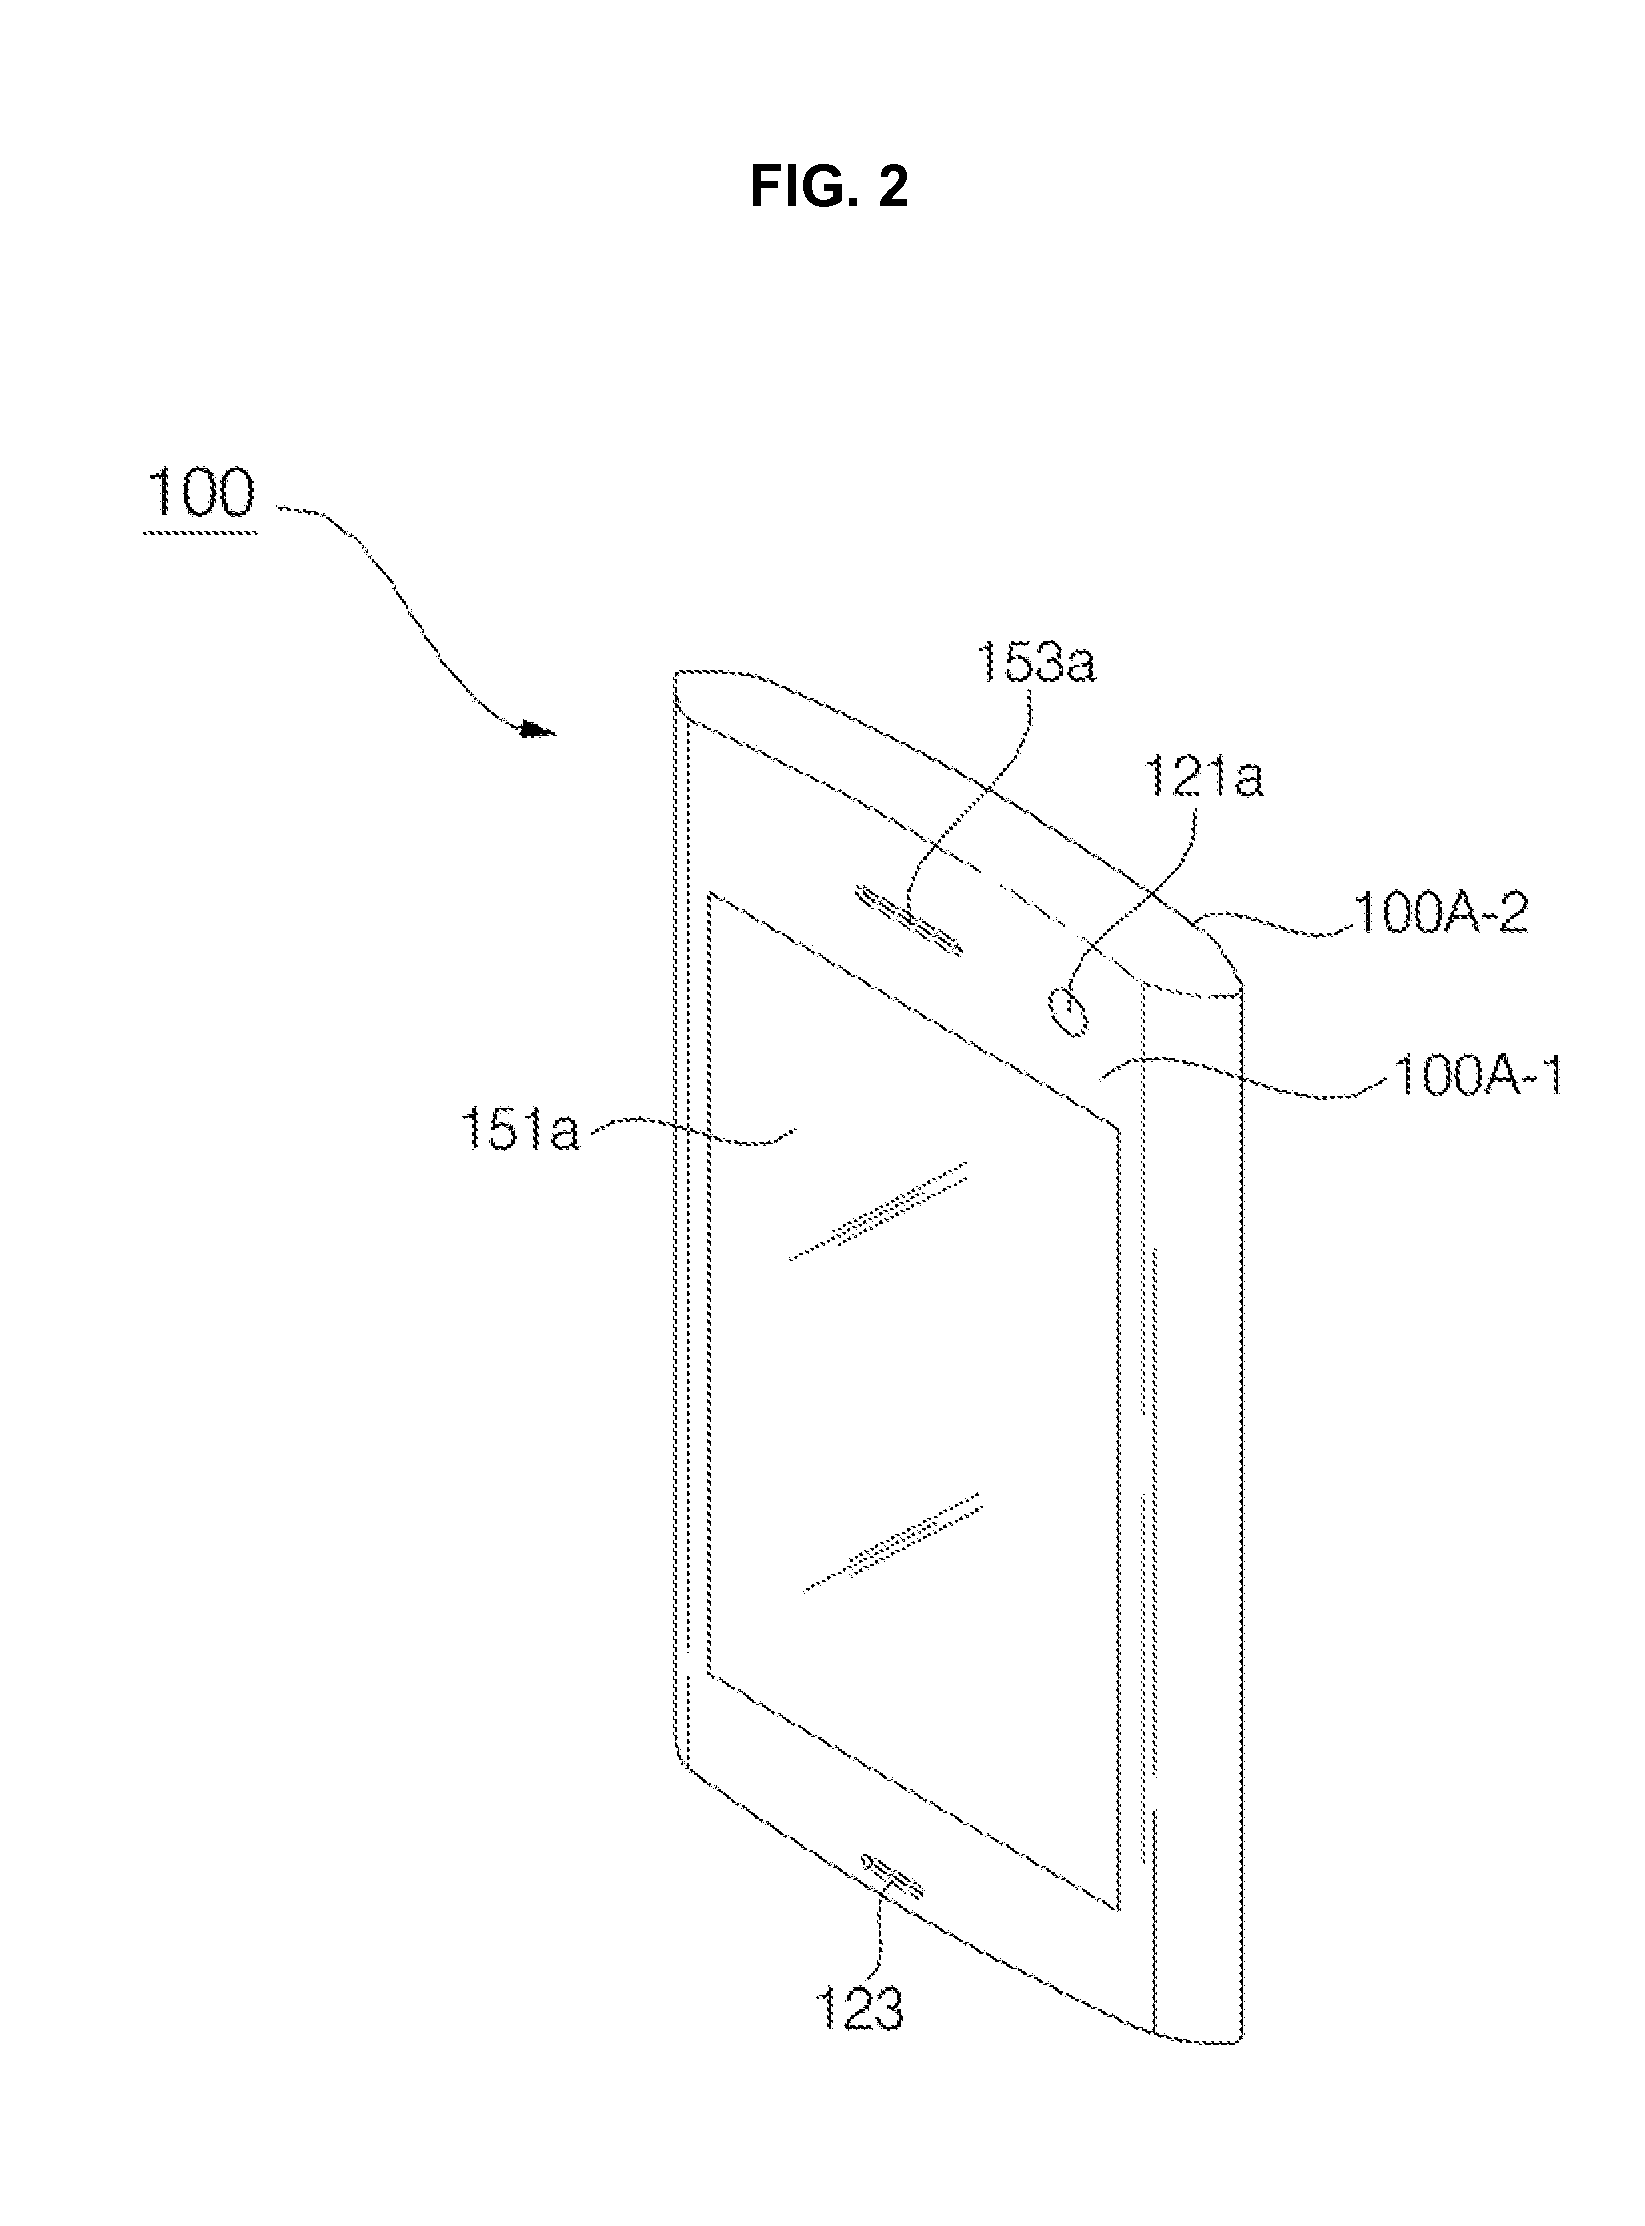 Mobile terminal and method of controlling operation of mobile terminal